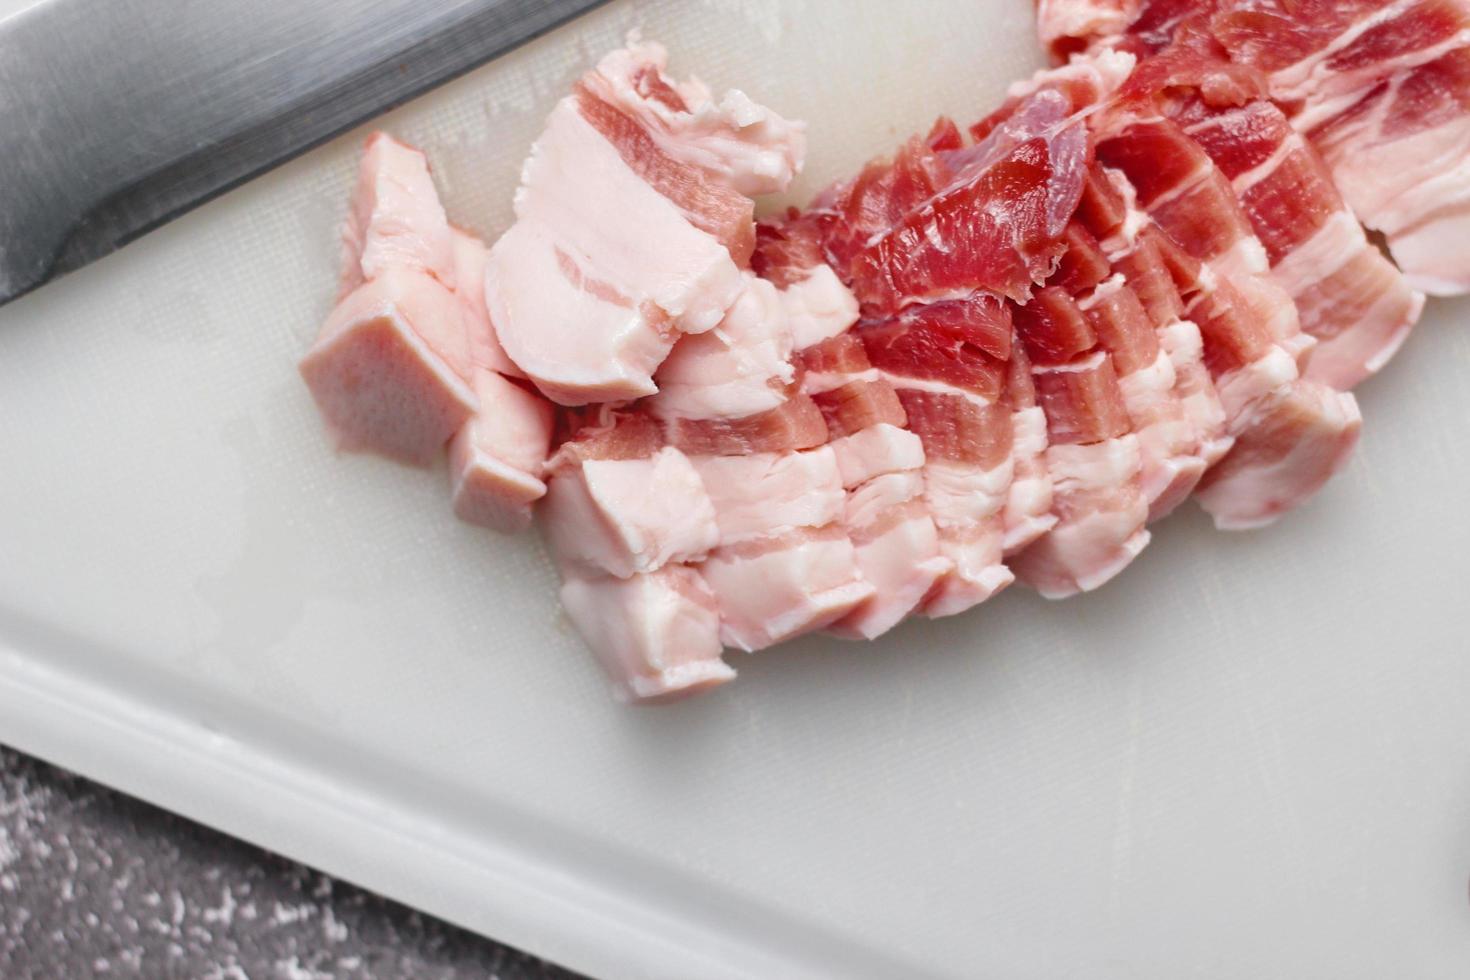 streaky pork is sliced on a white chopping board in the kitchen.Close up cutting slide pork belly raw photo